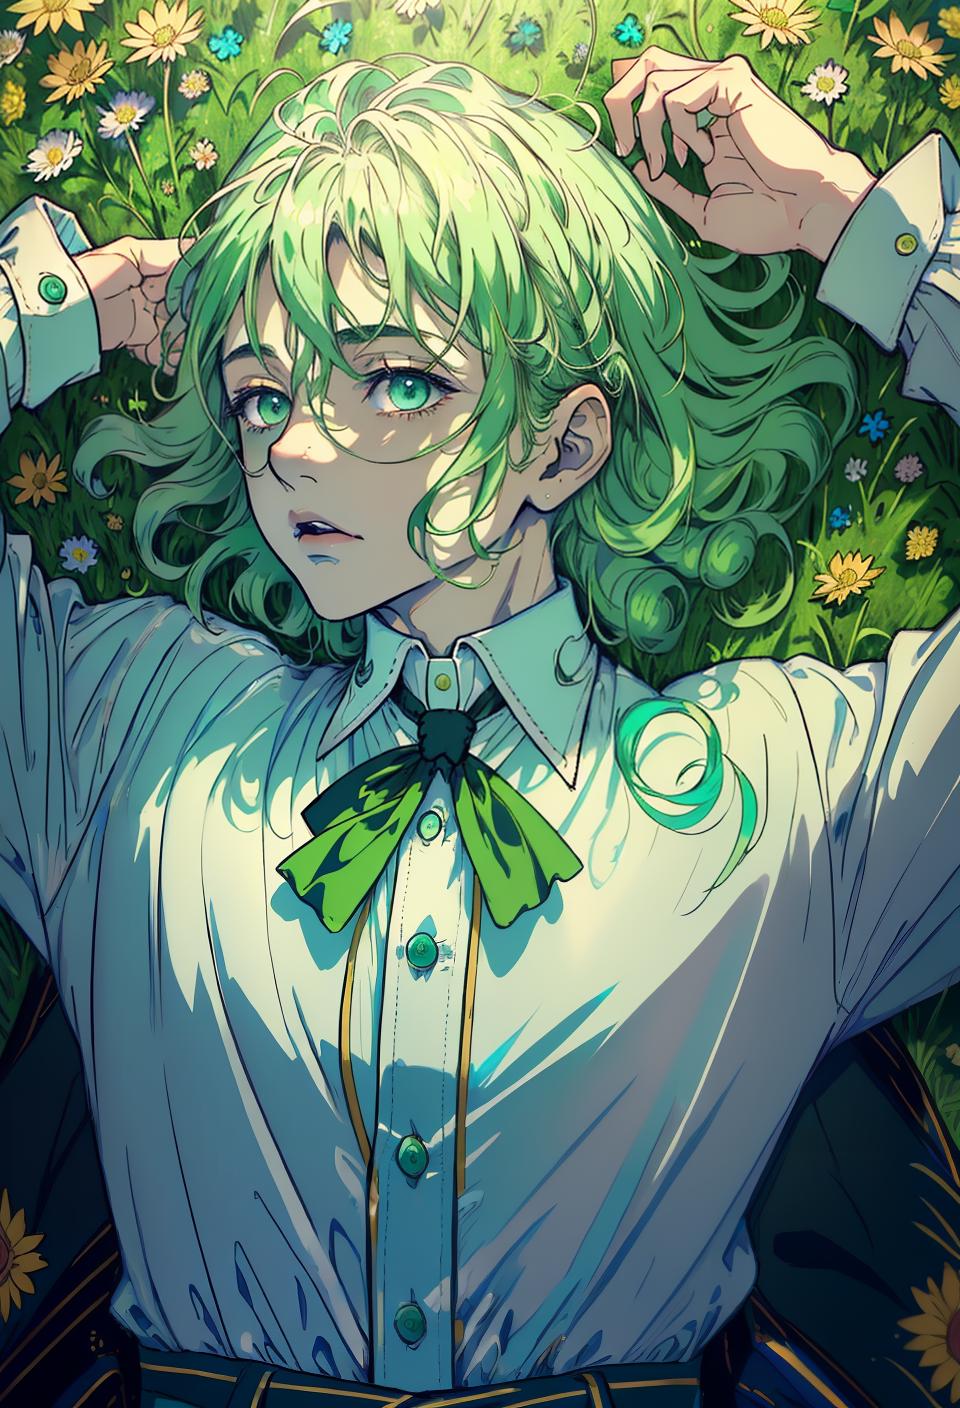  ((trending, highres, masterpiece, cinematic shot)), 1boy, mature, male clown outfit, flower field scene, long curly light green hair, parted bangs,  aqua eyes, high class, elegant personality, relaxed expression, very pale skin, morbid, lucky